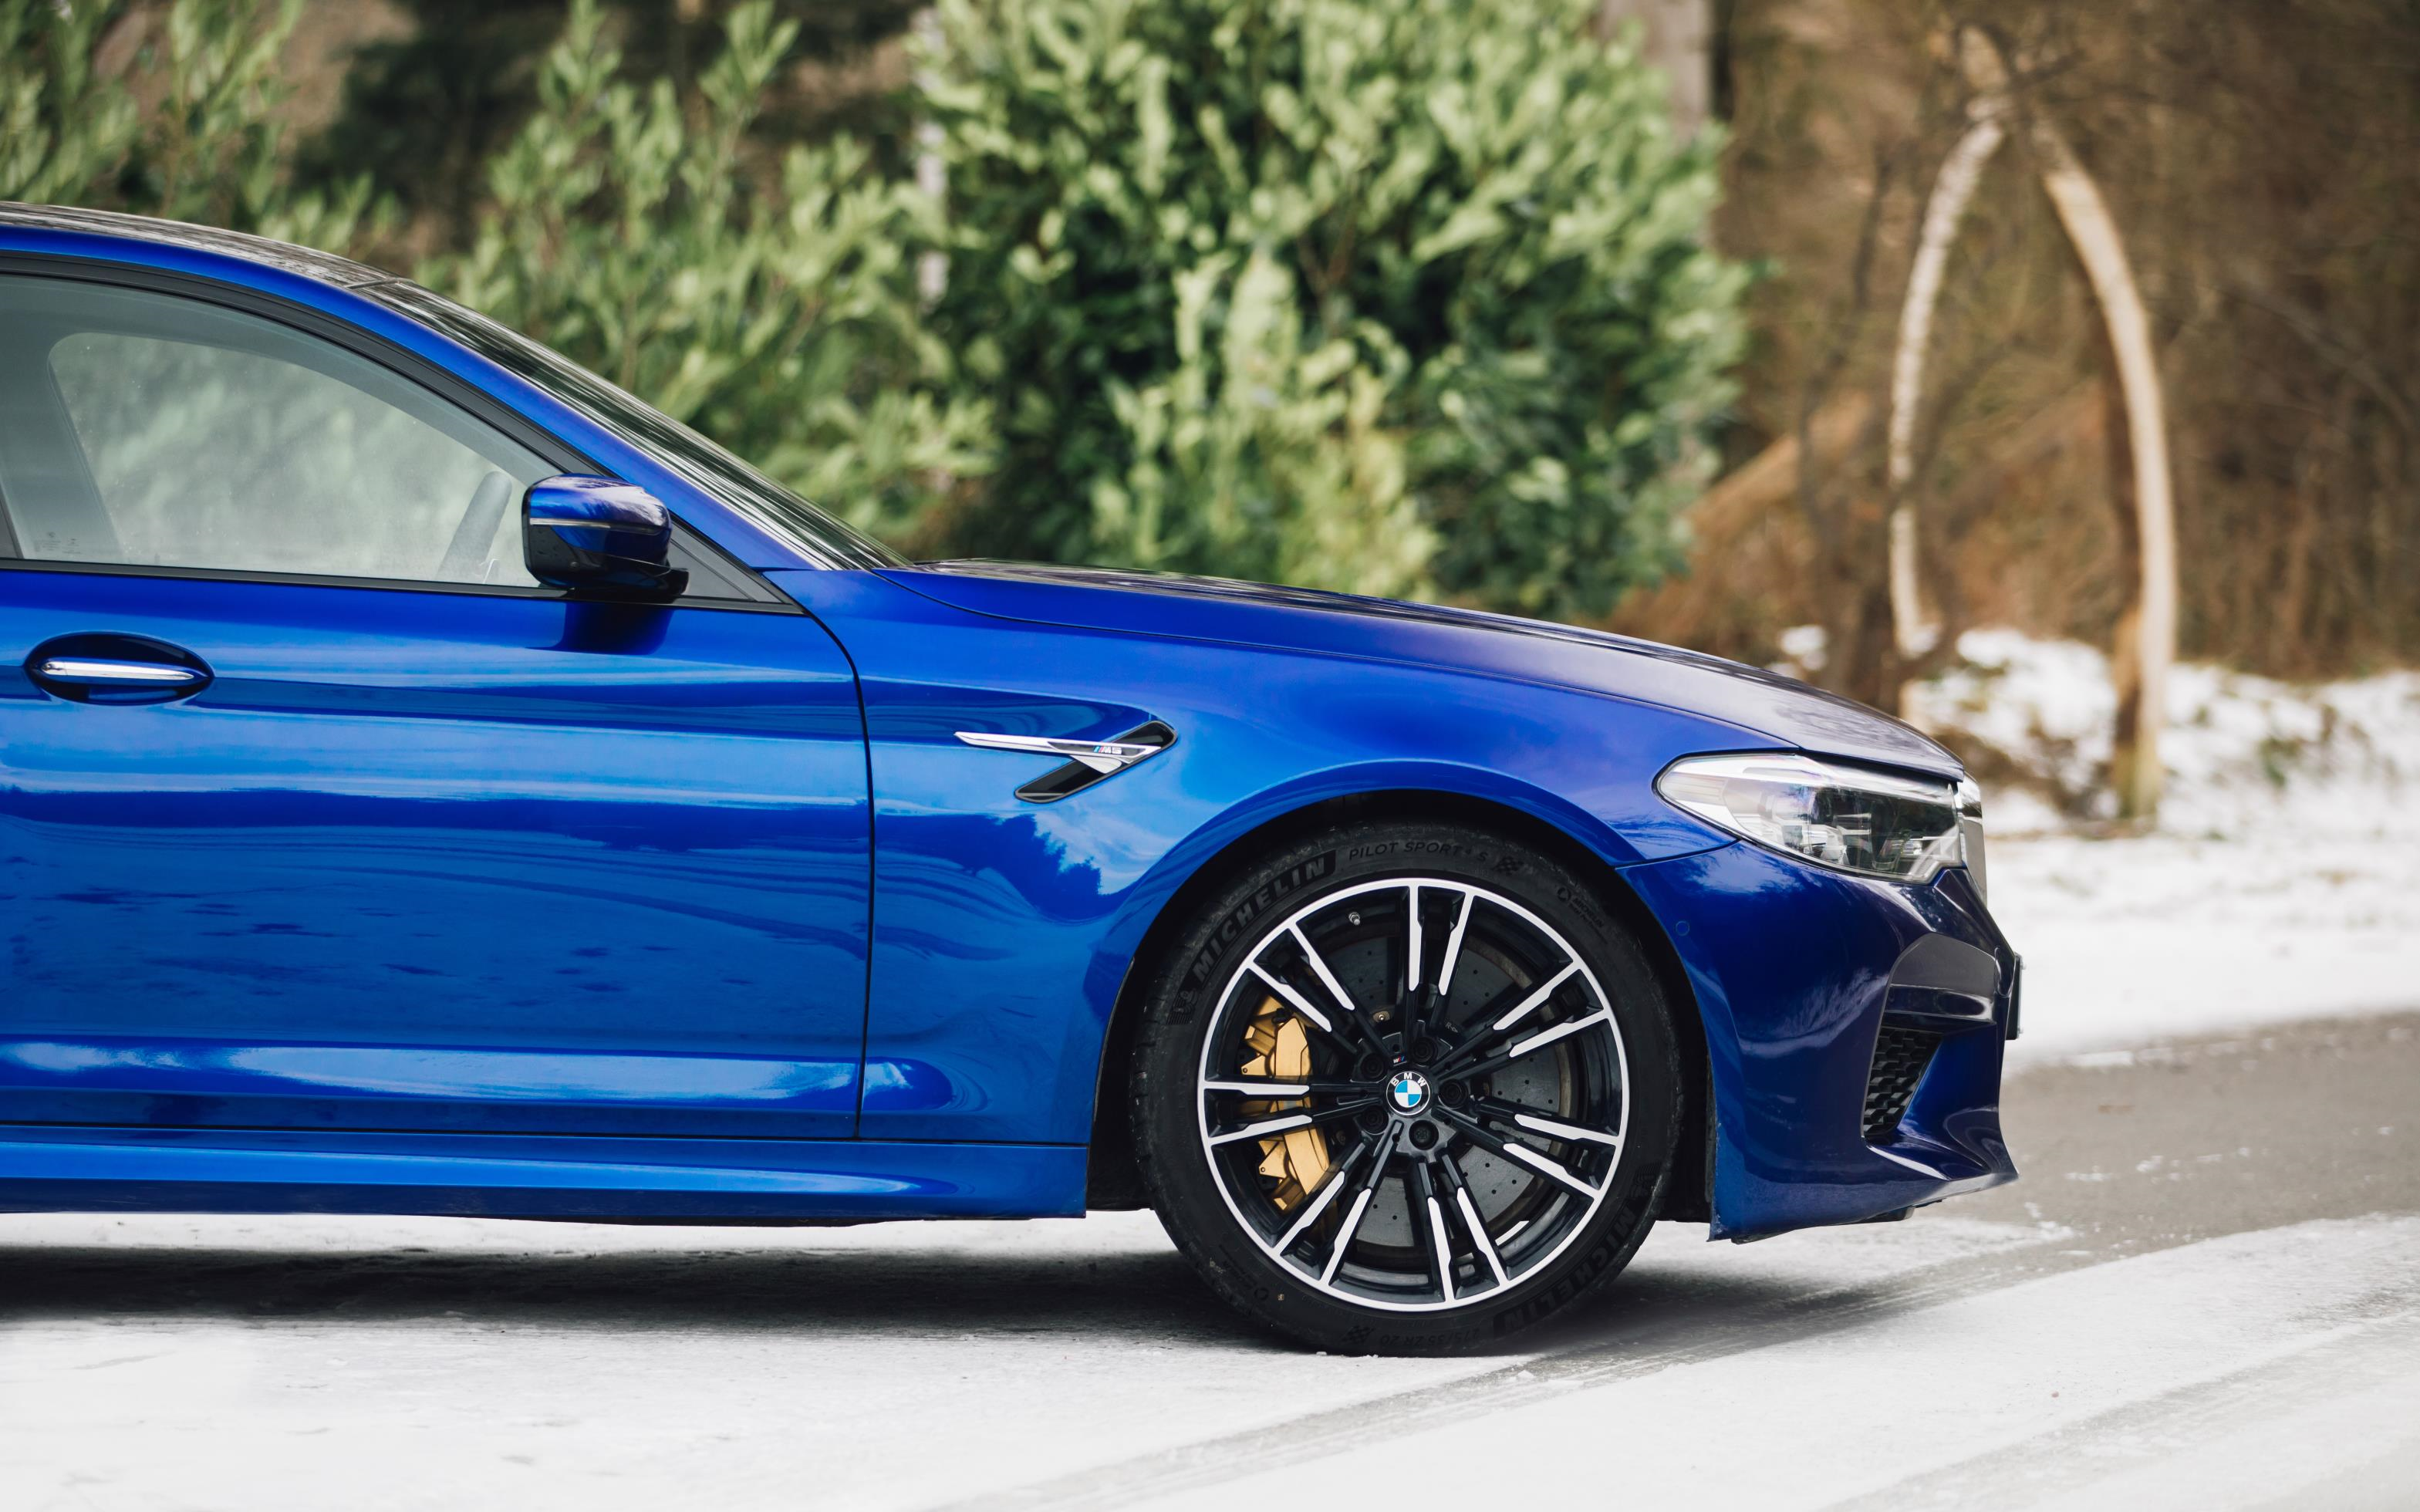 BMW’s ultimate M5 iteration gives traction a fresh set of values